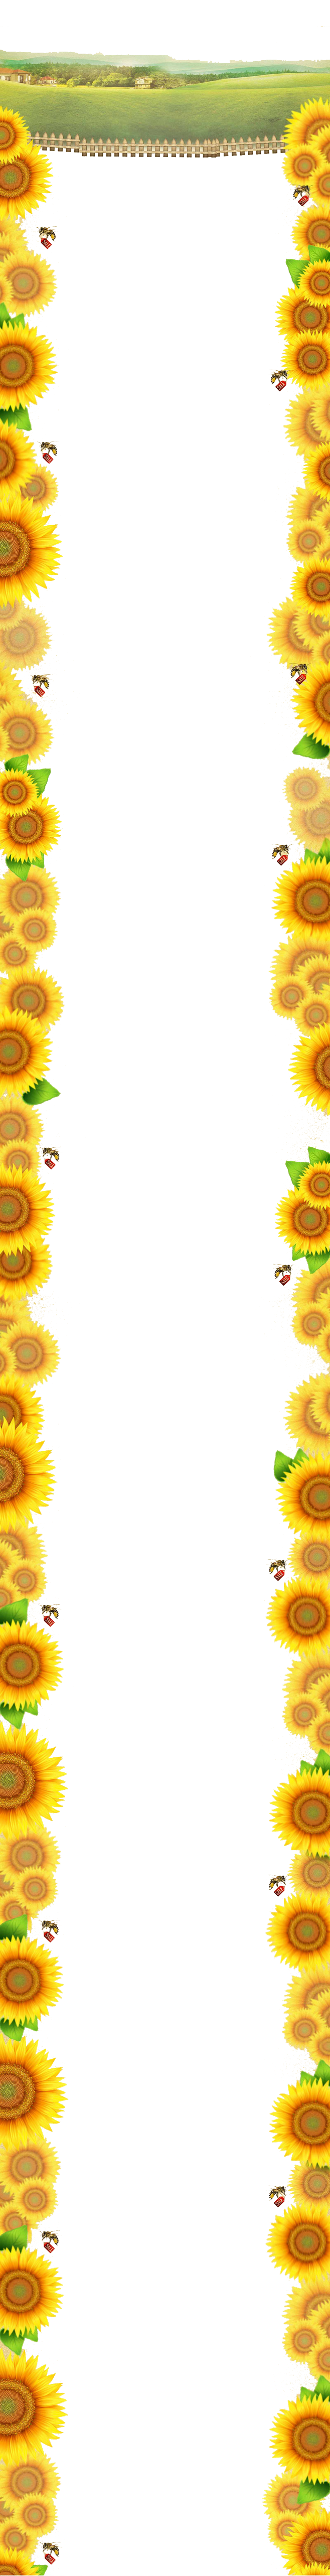 Angle Sunflower Area Pattern Yellow Border PNG Image